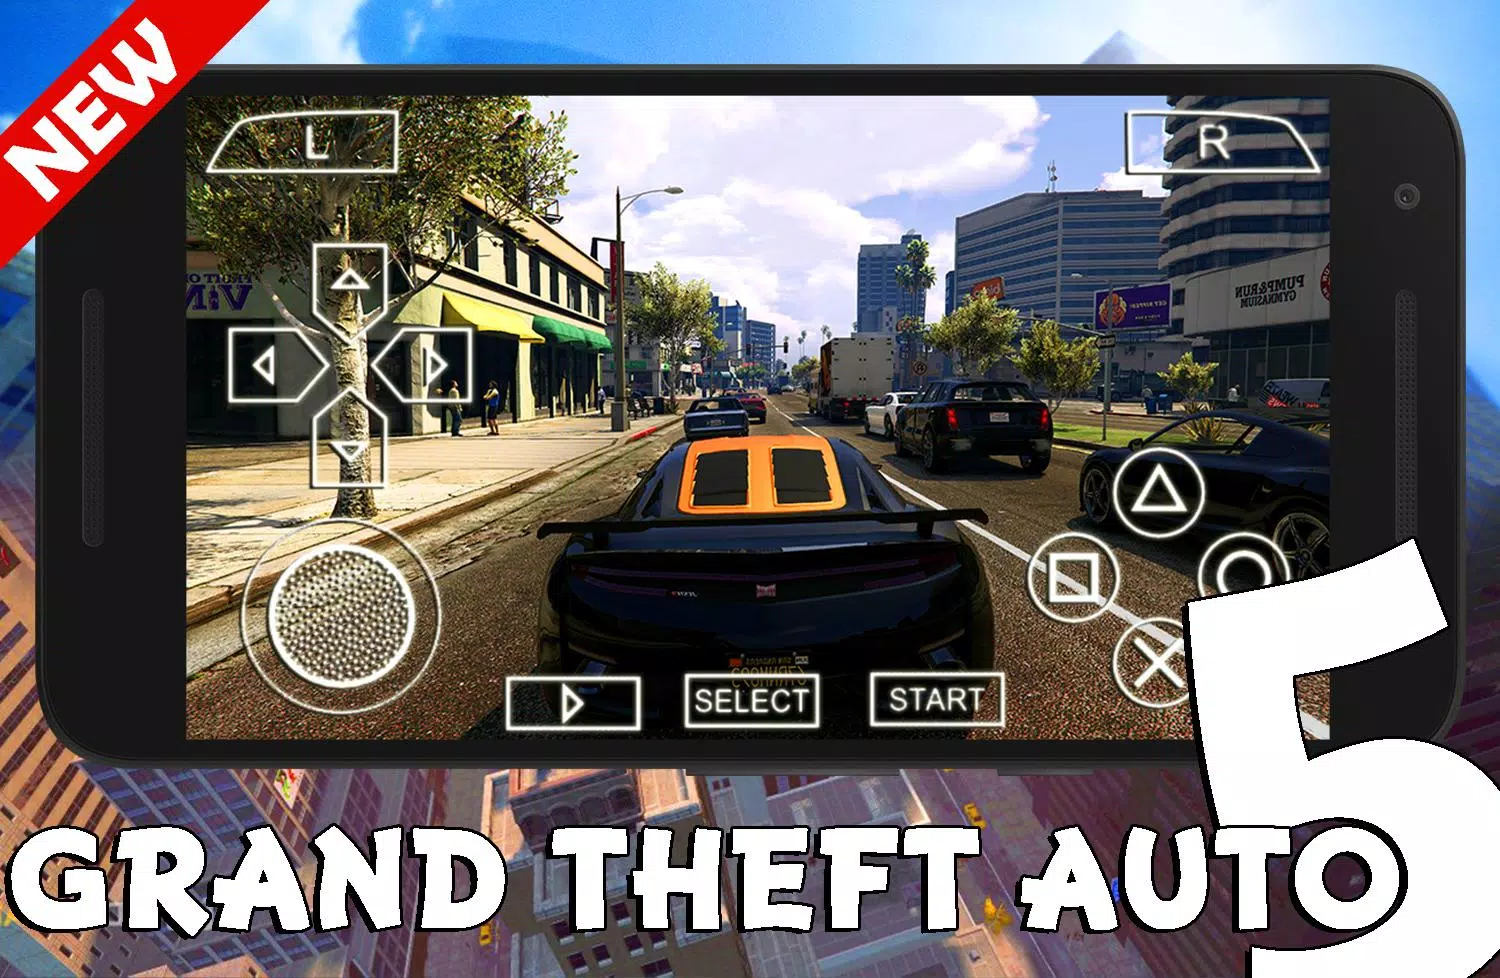 Grand Theft Auto V: The Manual for iPhone - Download